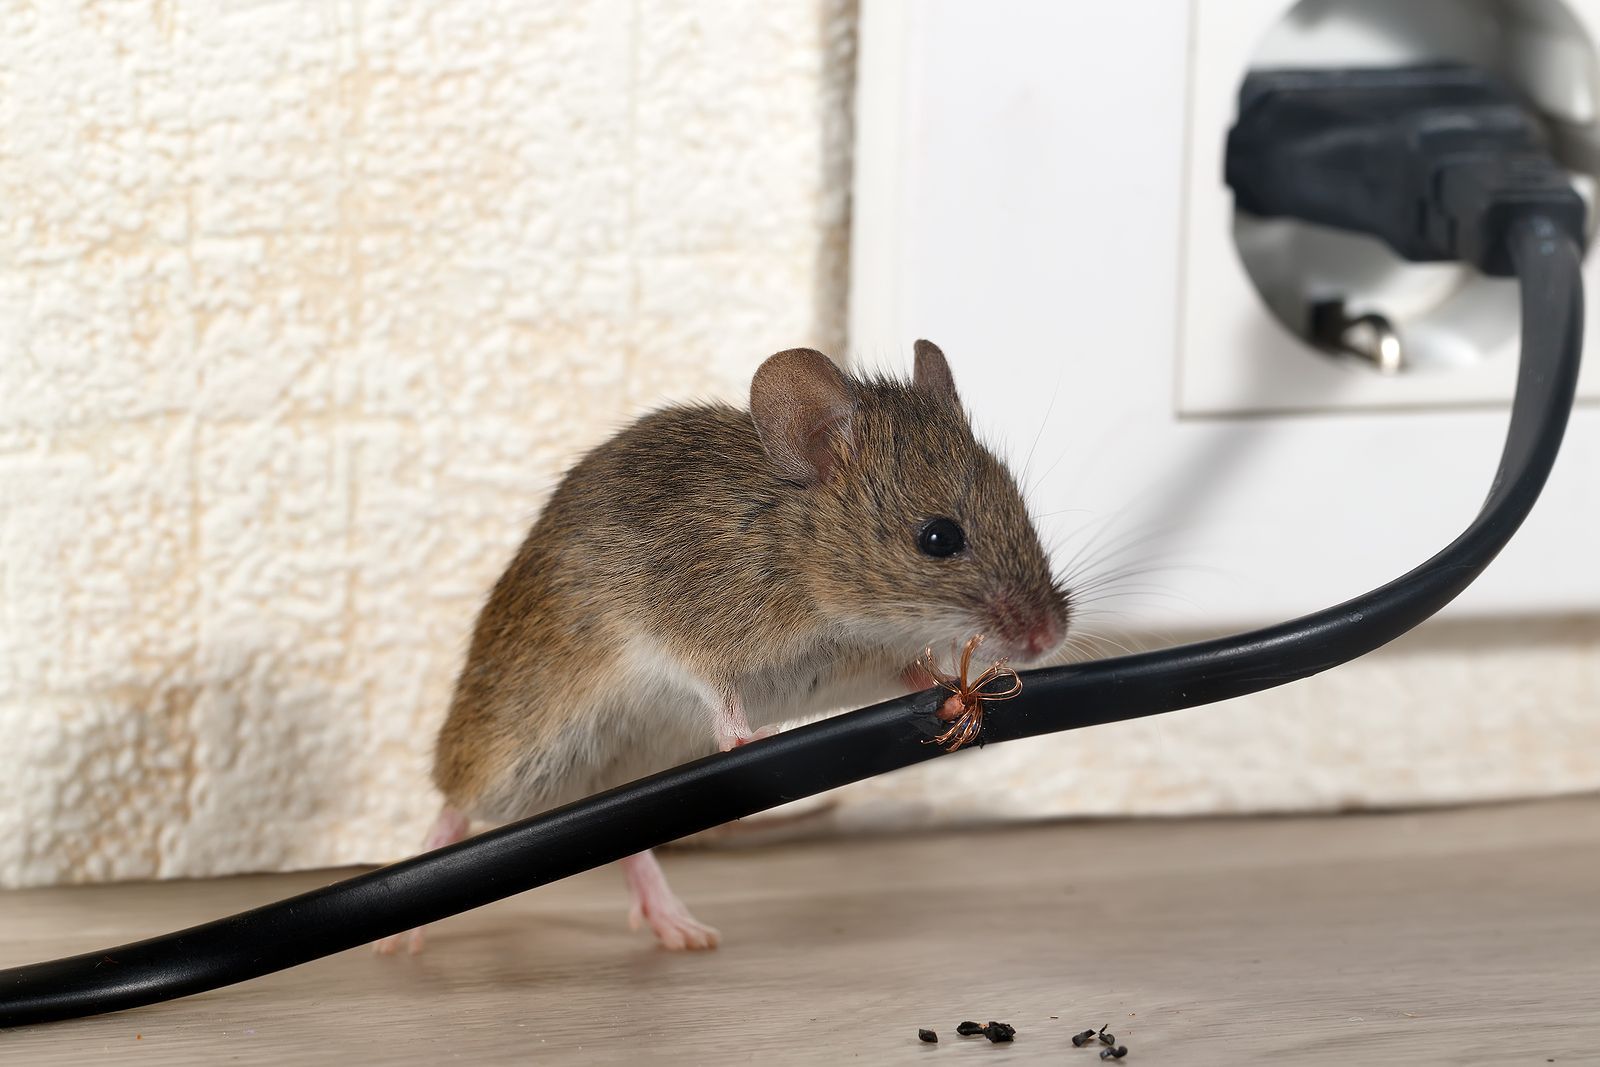 Pest Removal Services Near Me